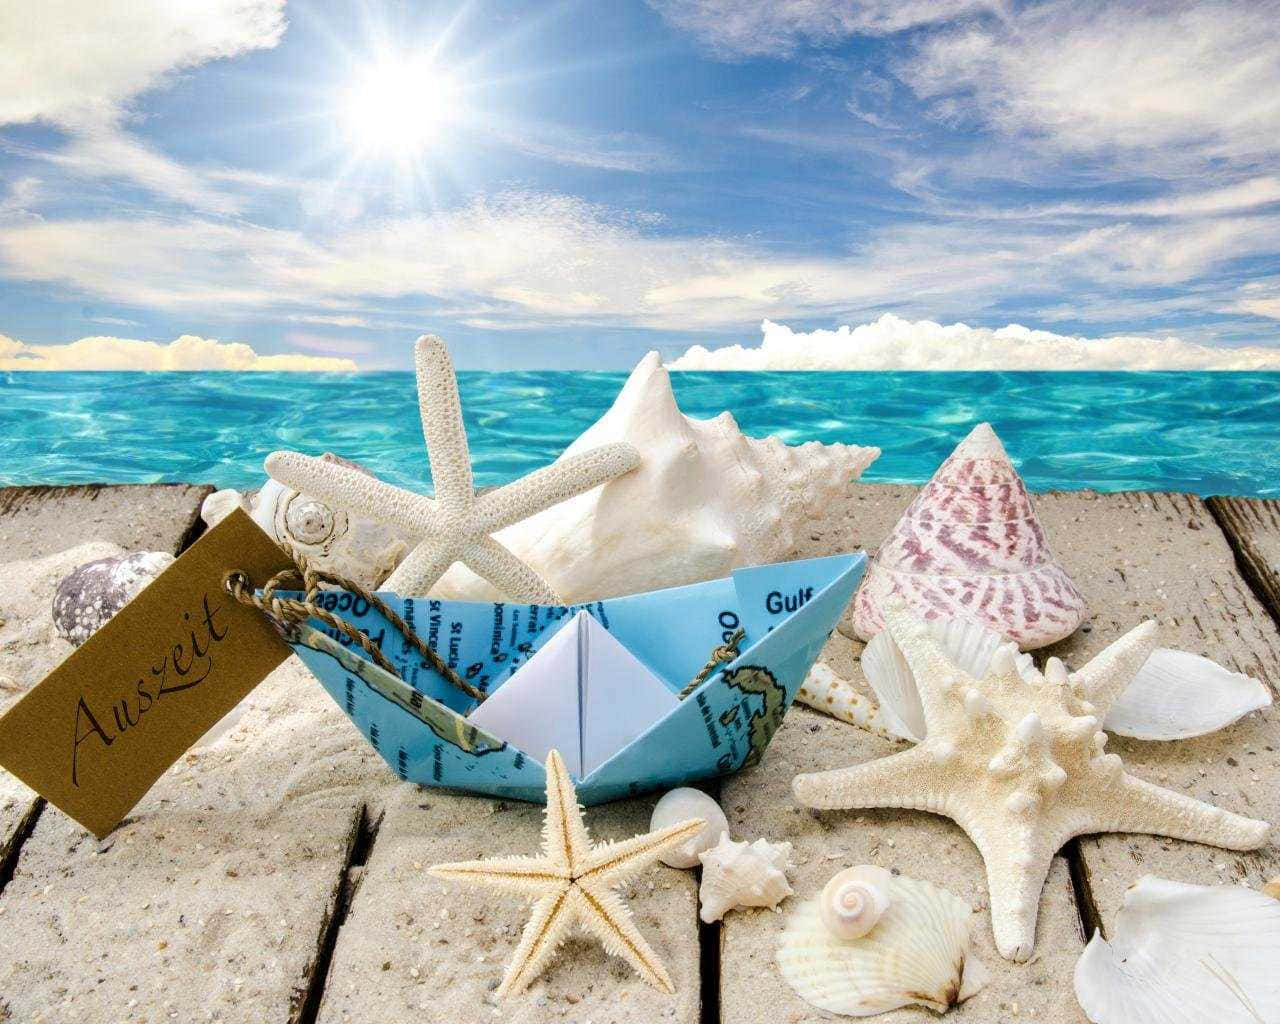 A paper boat with a ticket for a journey - Starfish